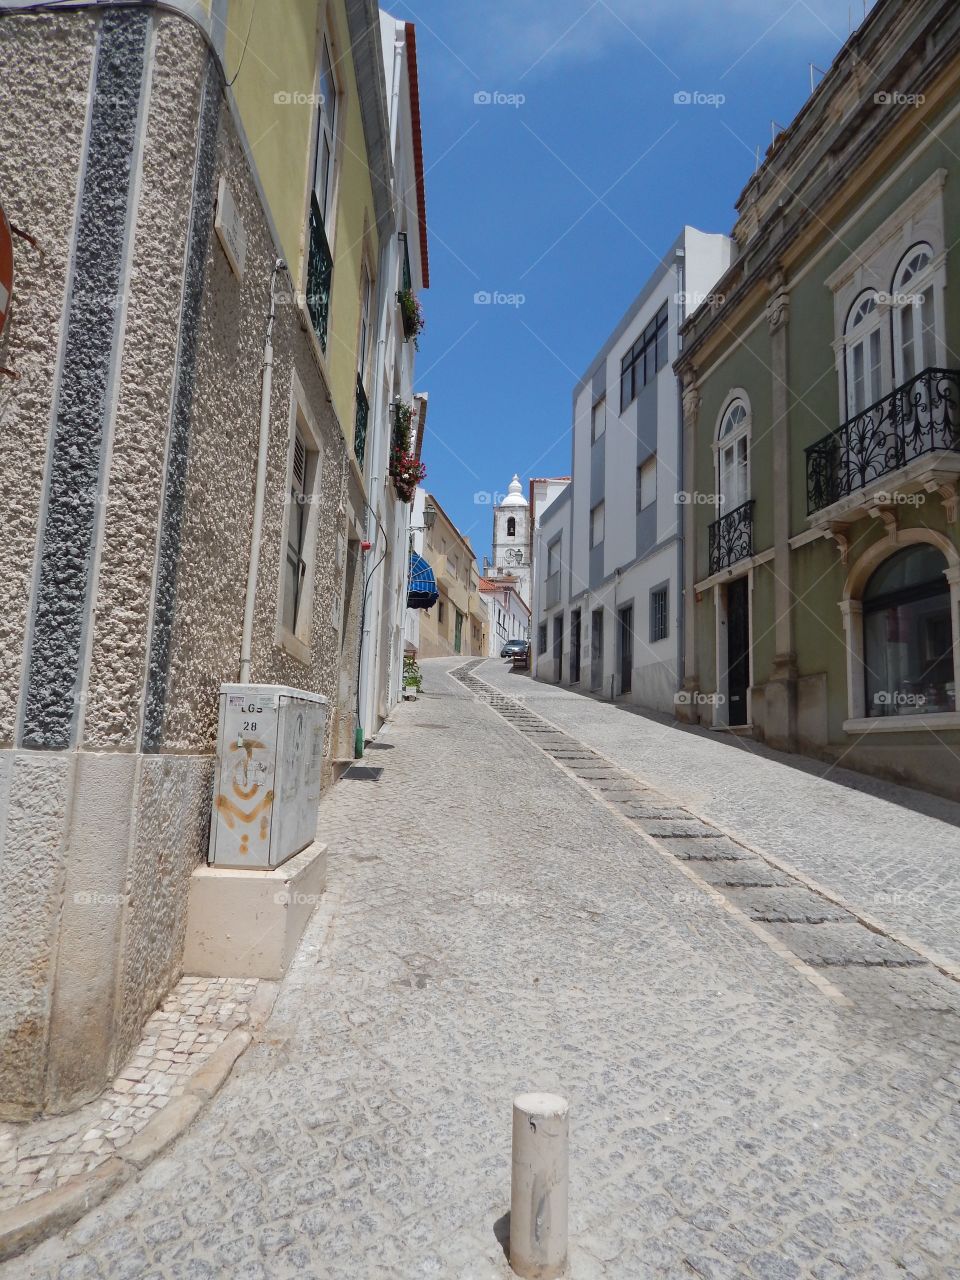 The streets of Lagos, Portugal 